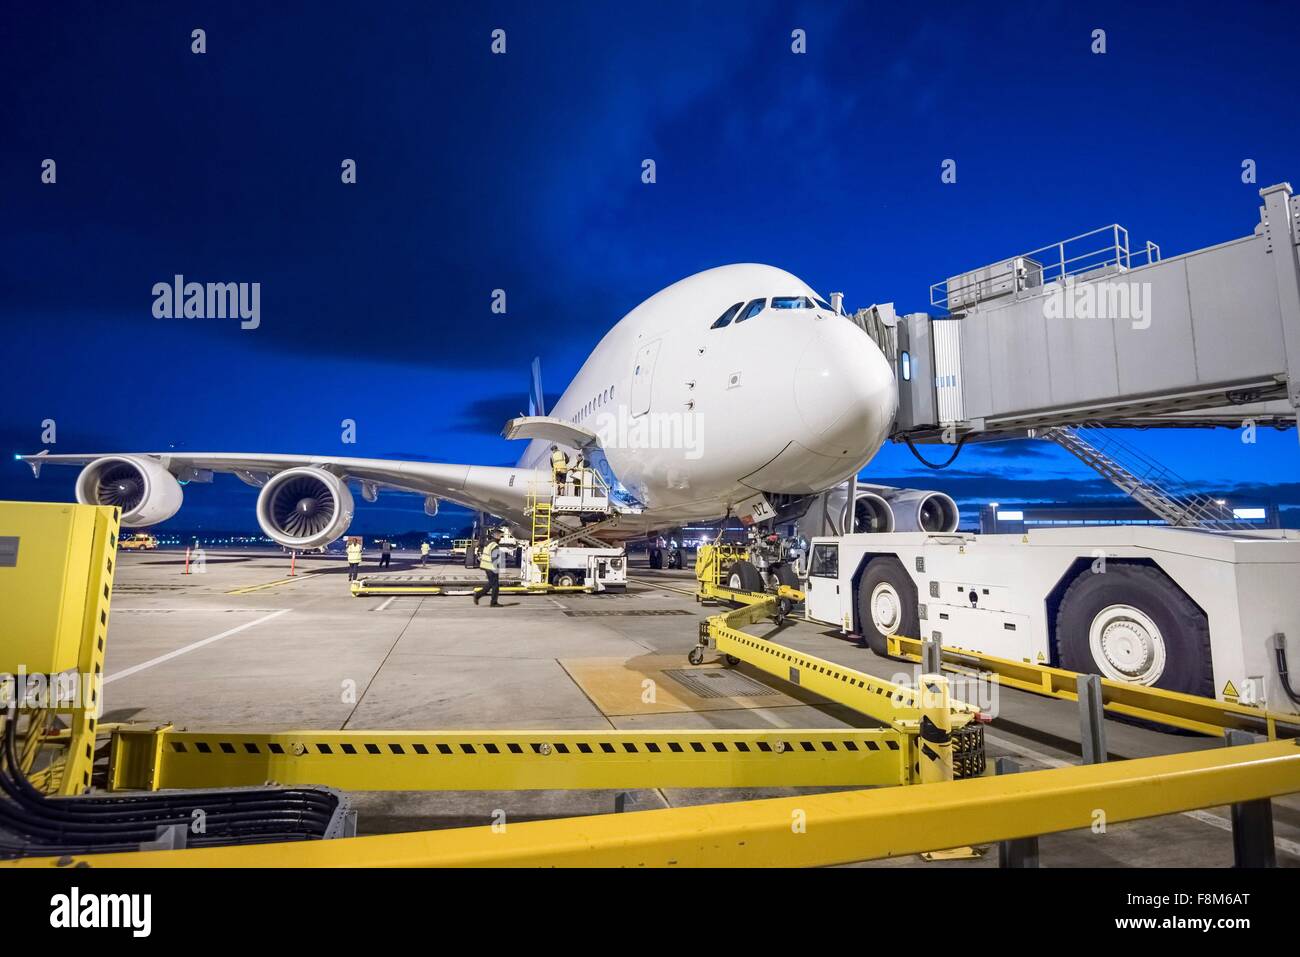 A380 aircraft on stand at airport at night Stock Photo